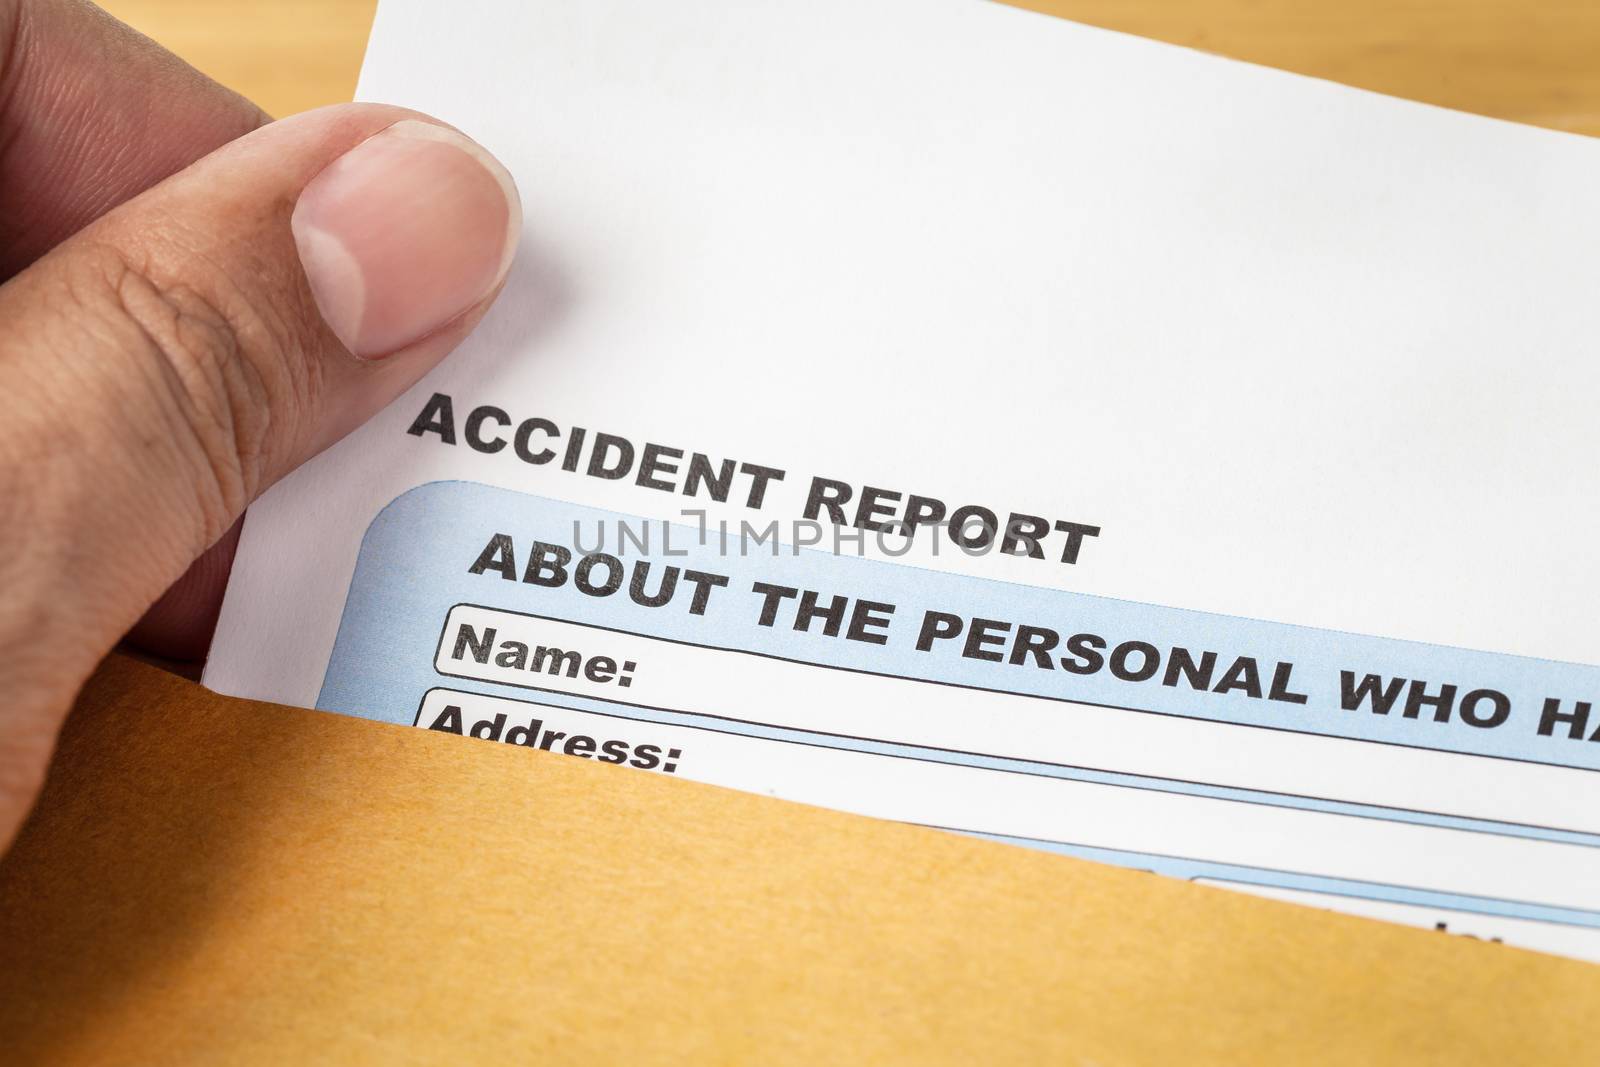 Accident report application form and human hand on brown envelop by FrameAngel